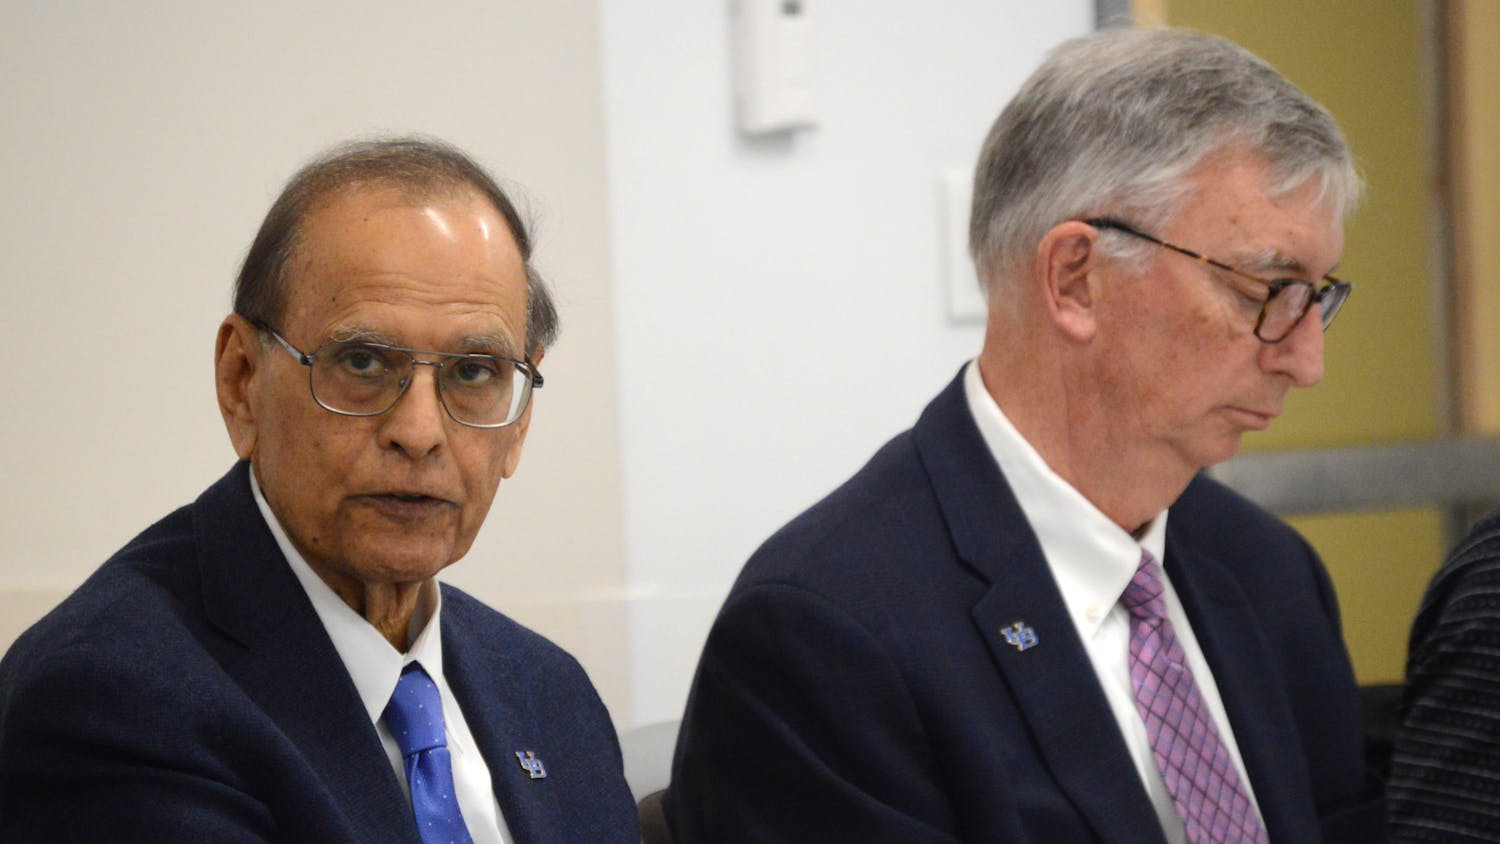 President Satish Tripathi and Provost A. Scott Weber were present at the meeting, and Tripathi read a statement emphasizing "the safety and security" of the university.&nbsp;